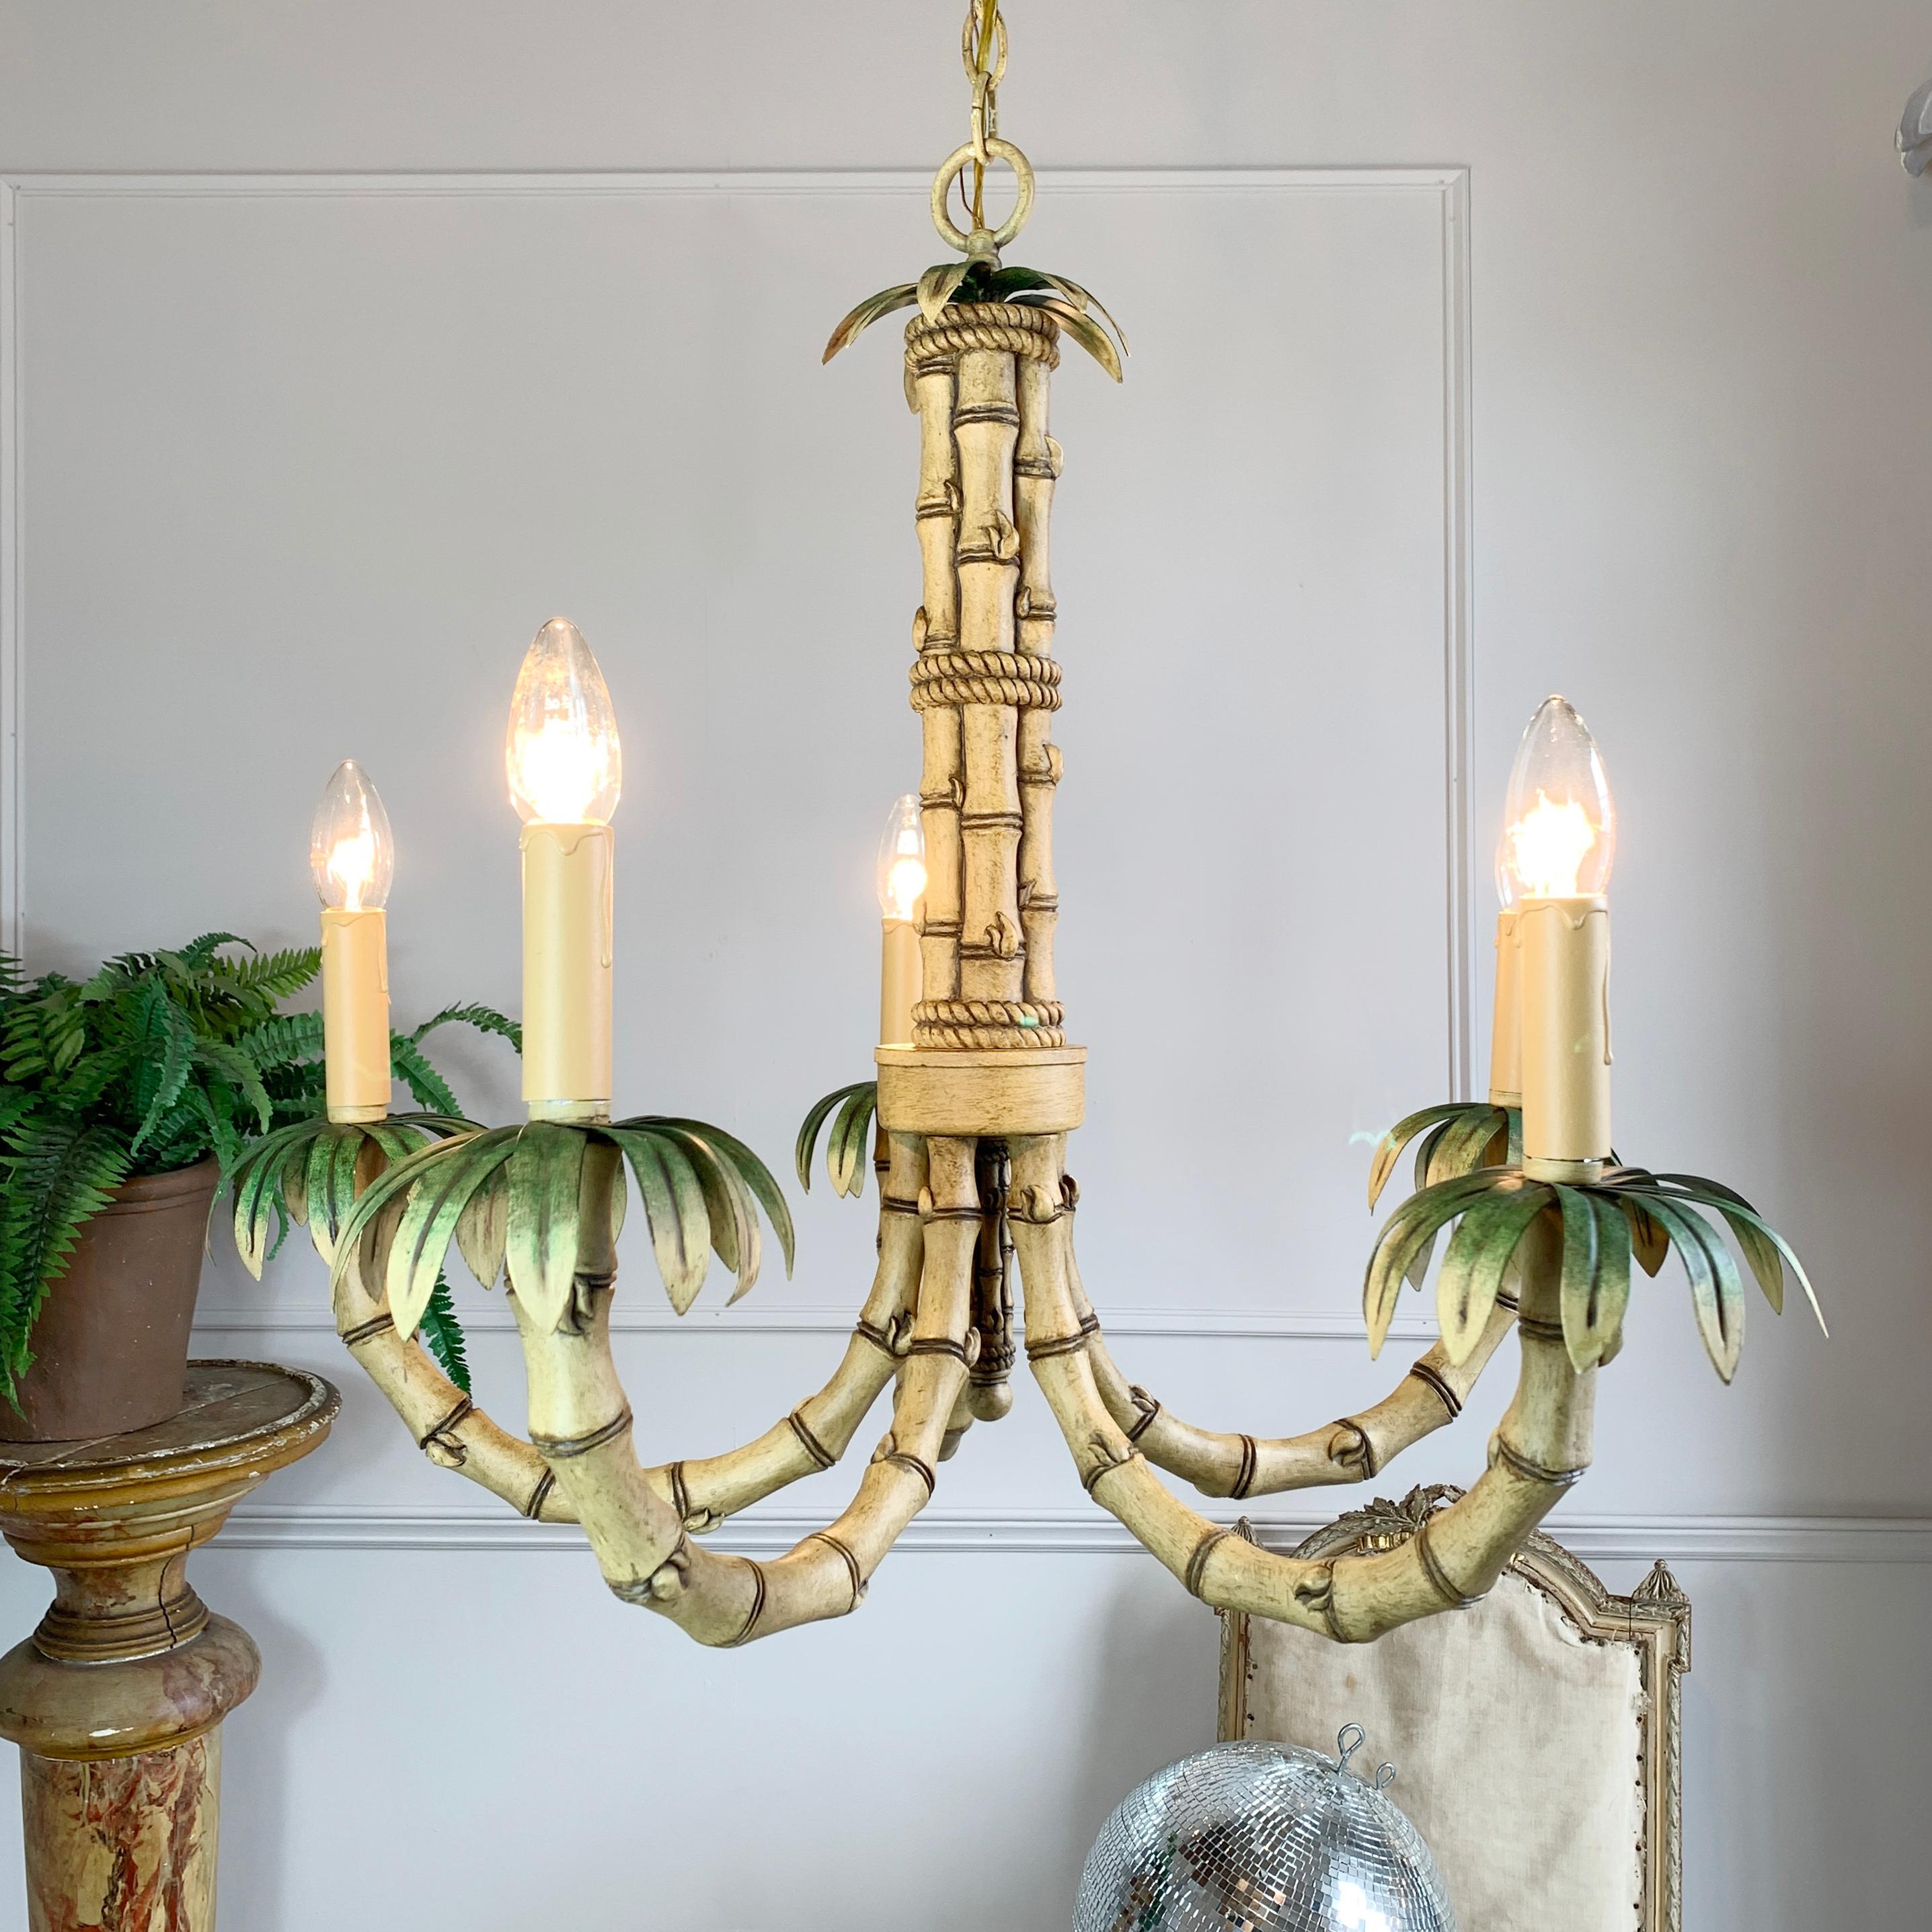 Naturalistic faux bamboo chandelier, created in painted metal to replicate the look of bamboo, this is a heavy and attractive light with 5 lamp holders all adorned with painted leaf decoration. Dates to the 1980’s.

Measures: Height 90cm x width